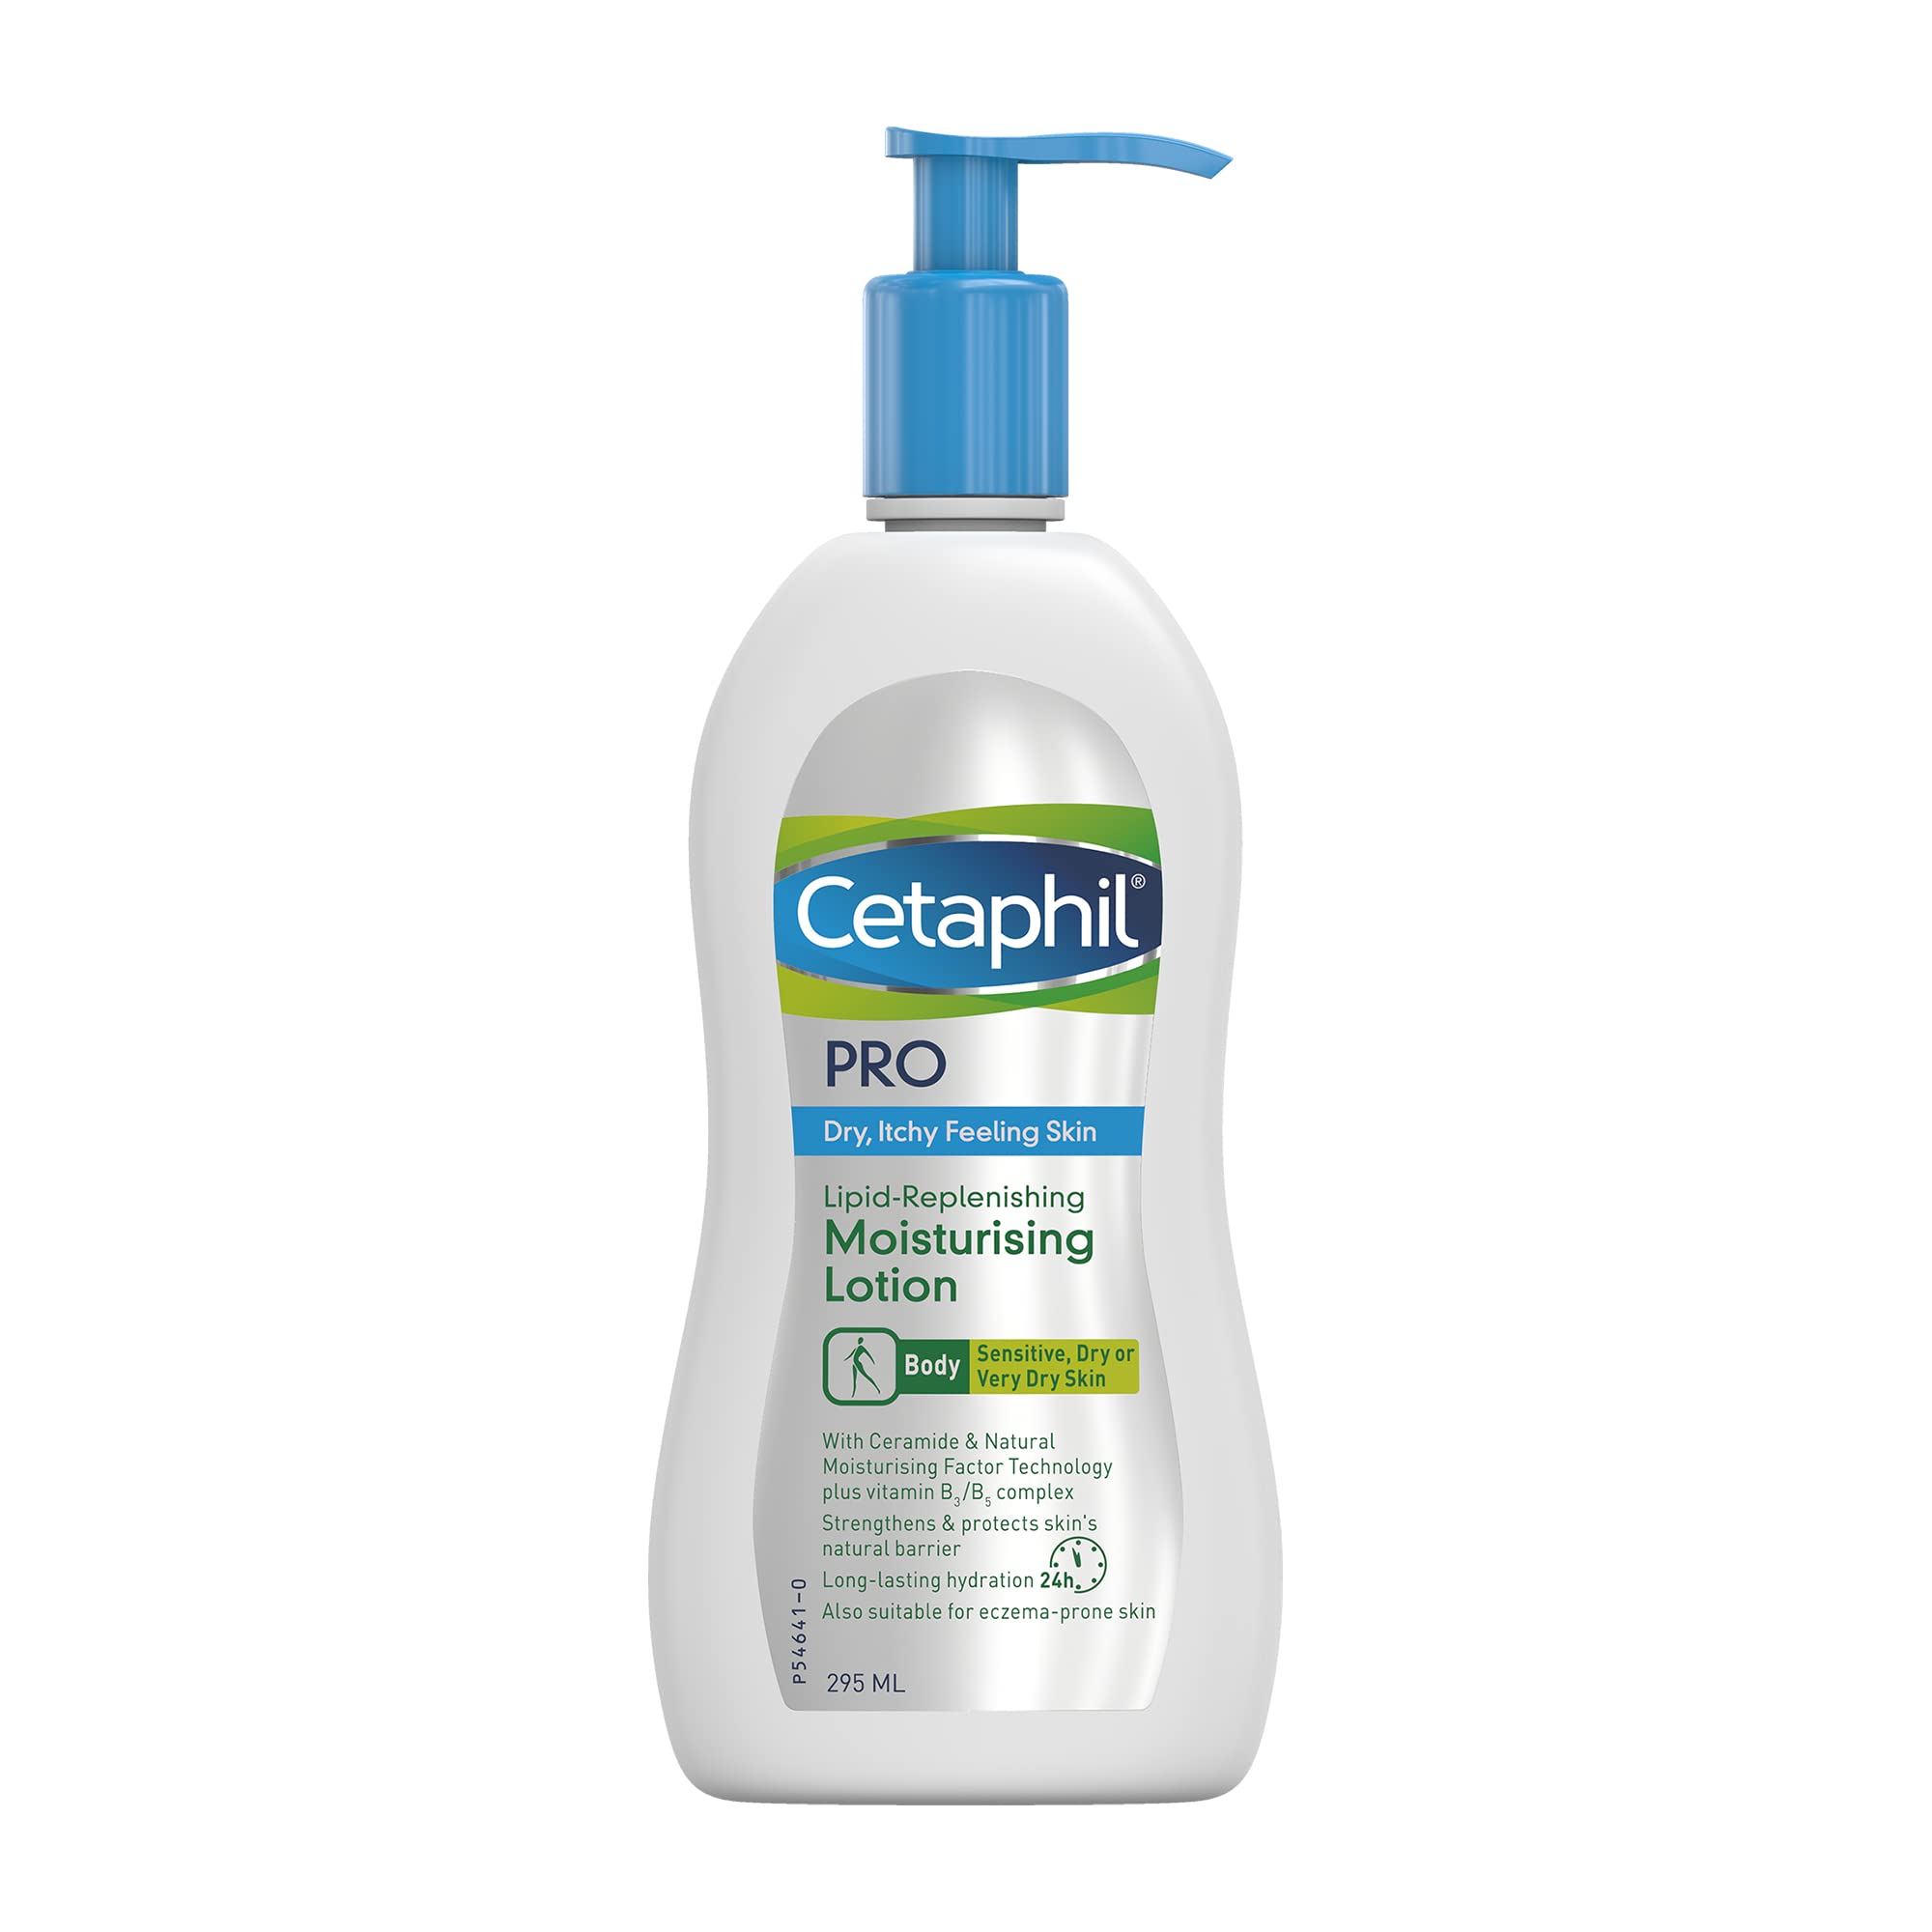 Cetaphil Pro Itch Prone Moisturising Body Lotion 295ml, Soothes Eczema Prone Dry Skin With Ceramide Complex, Vegan Friendly